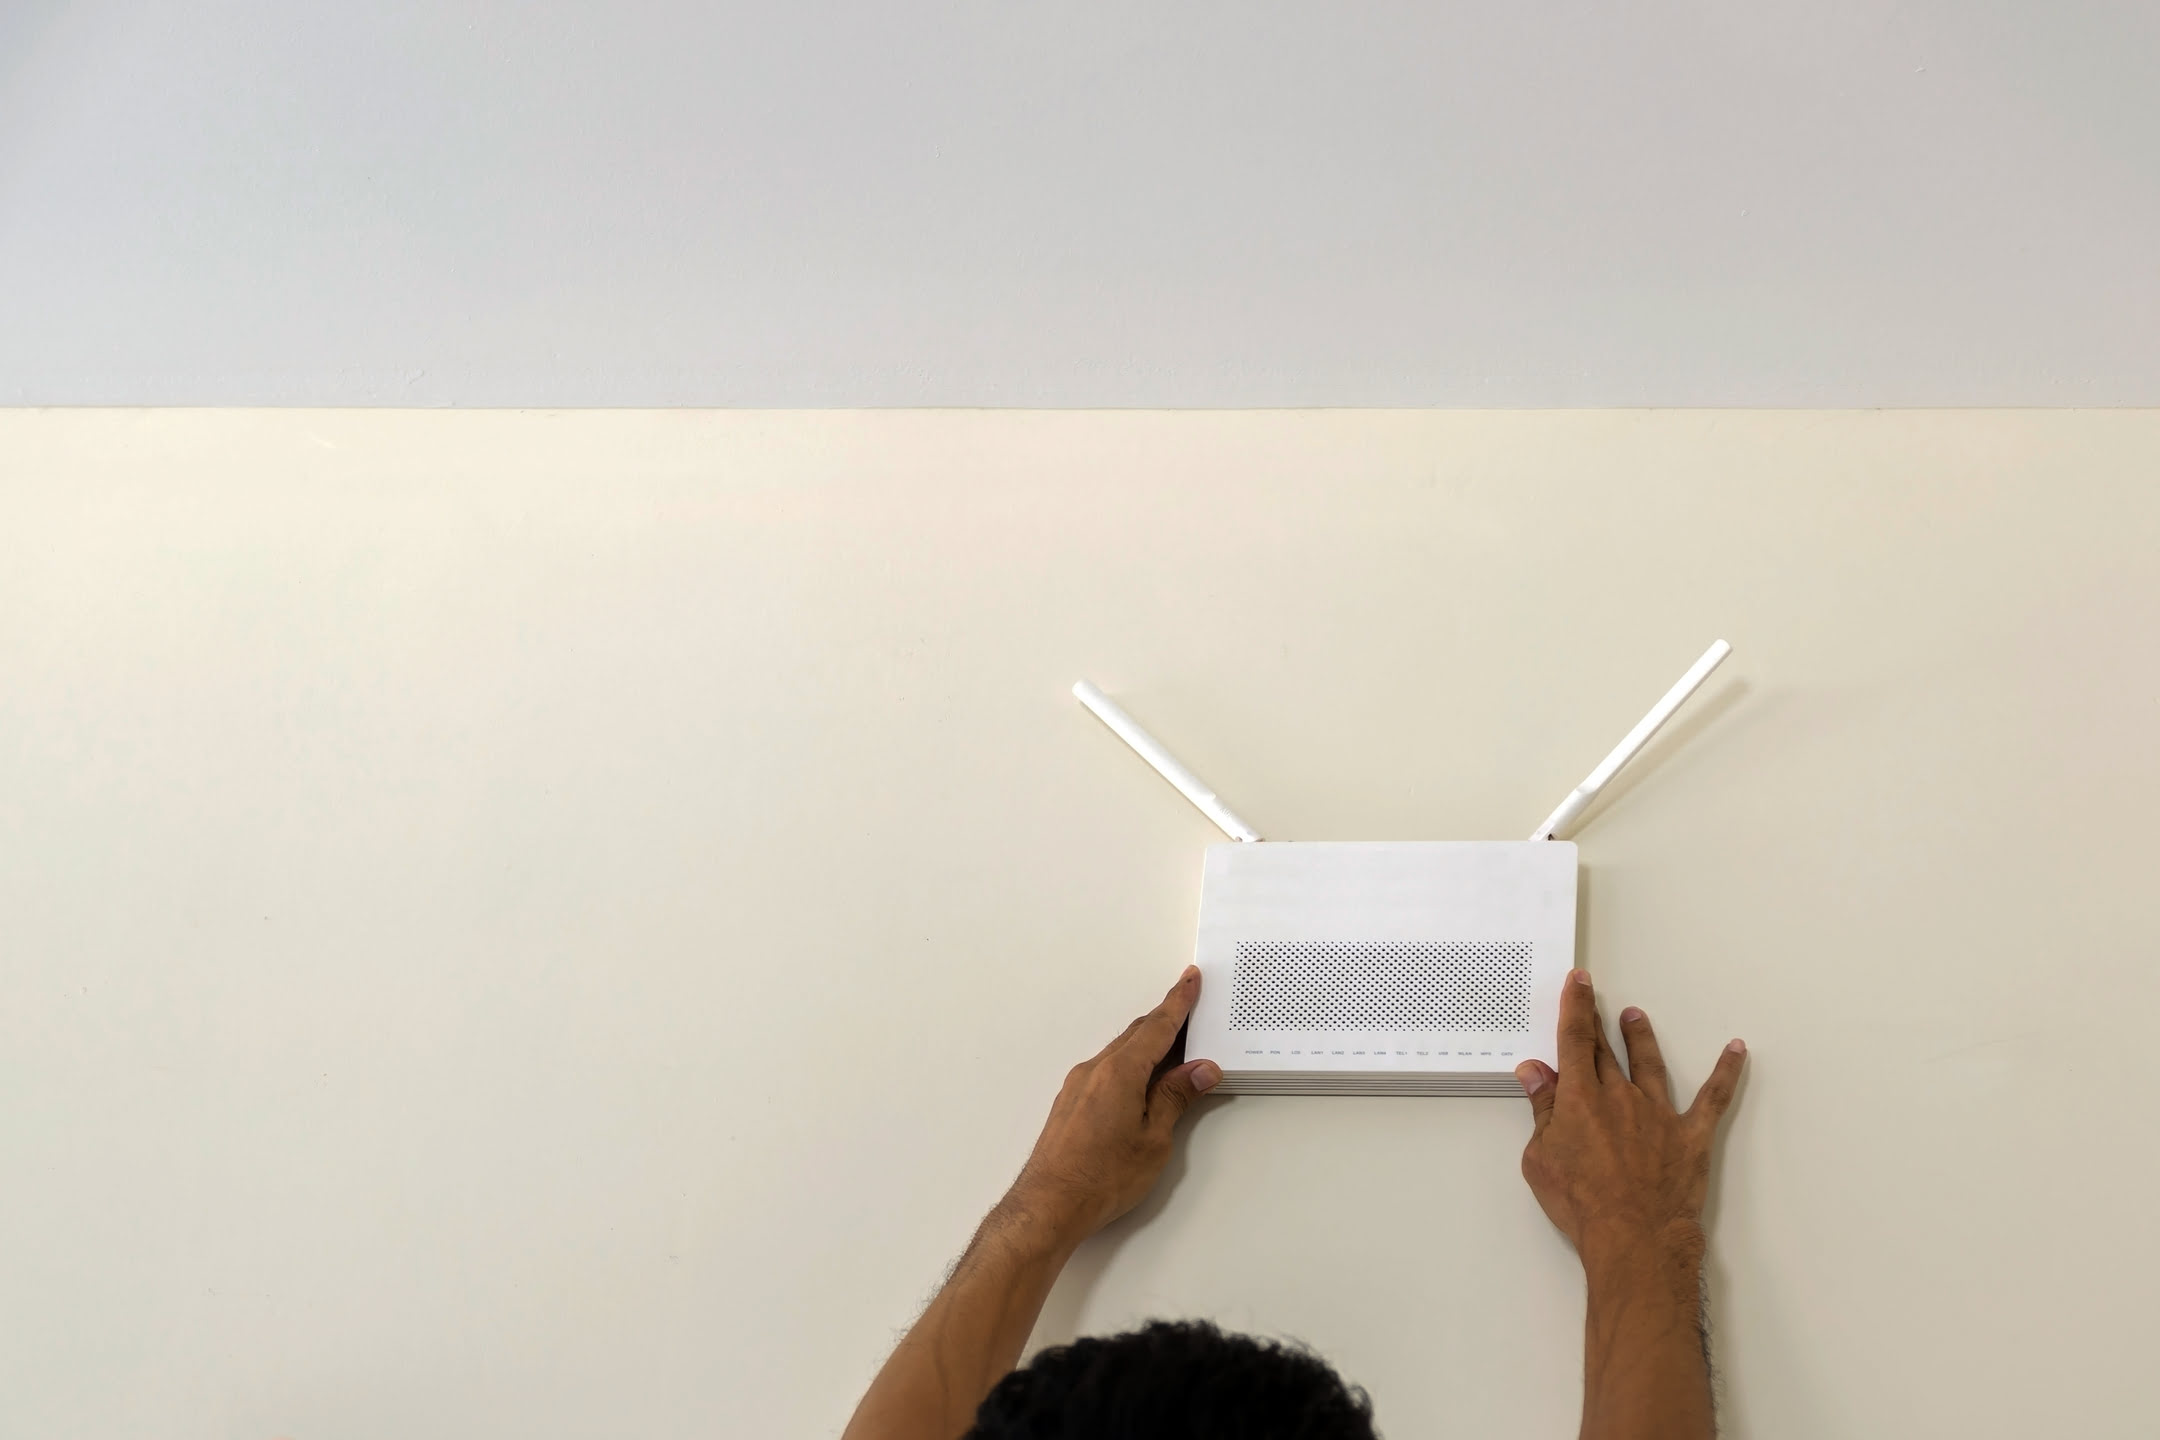 How To Make A Wi-Fi Router Faster